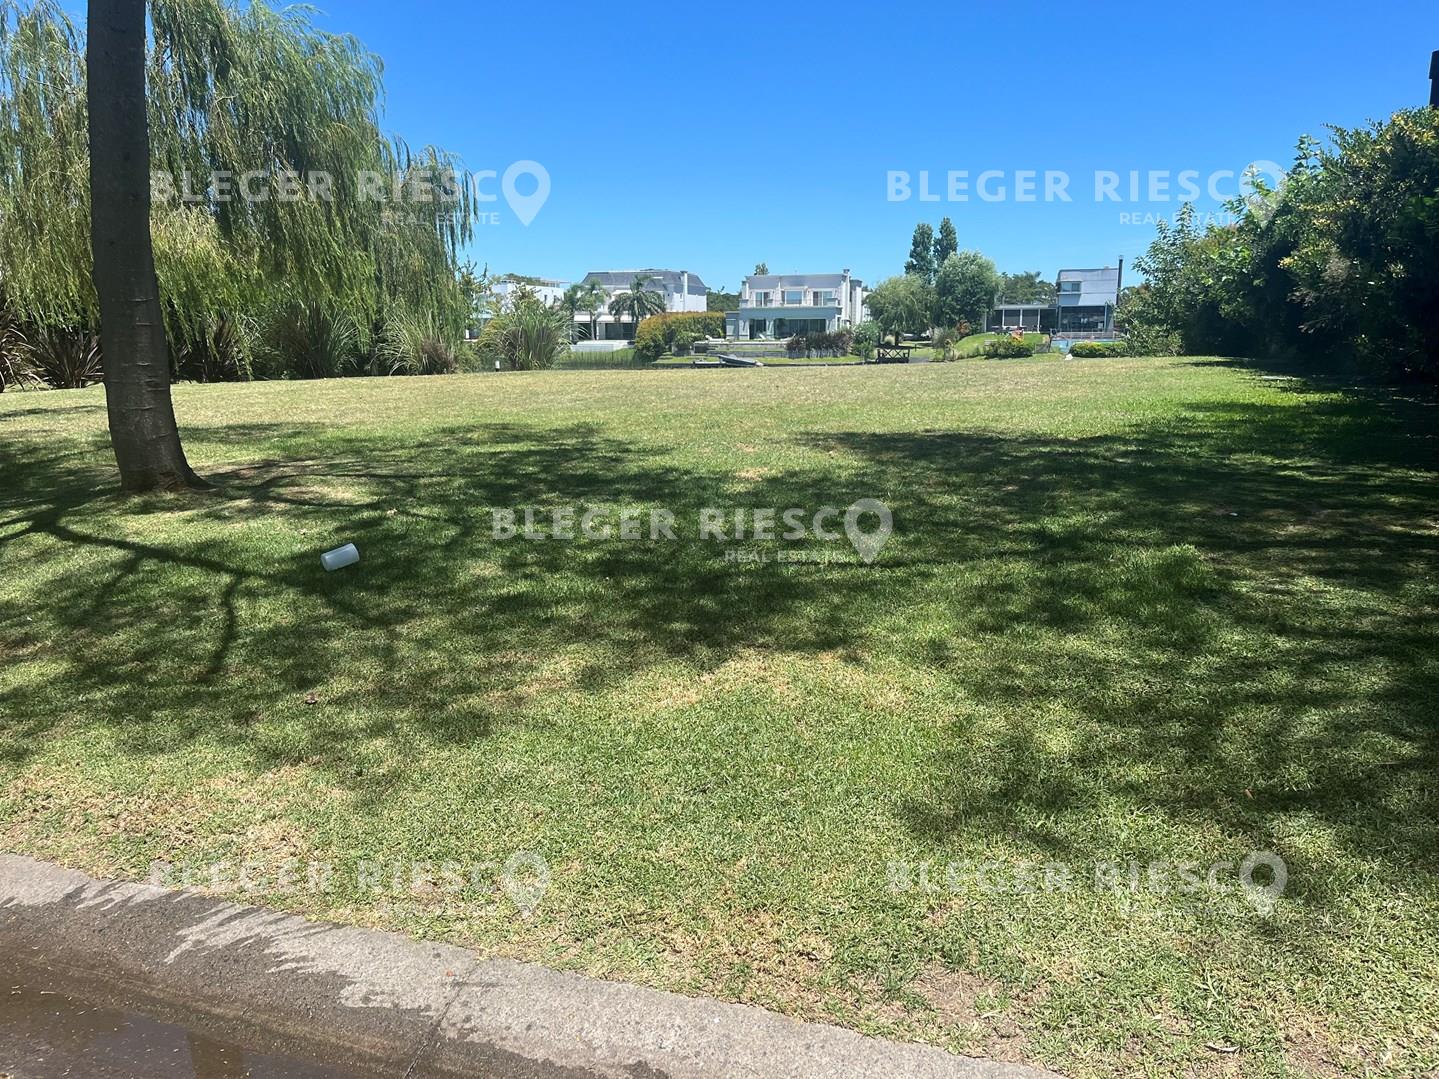 #4899488 | Sale | Lot | Los Lagos (Bleger-Riesco Real State)